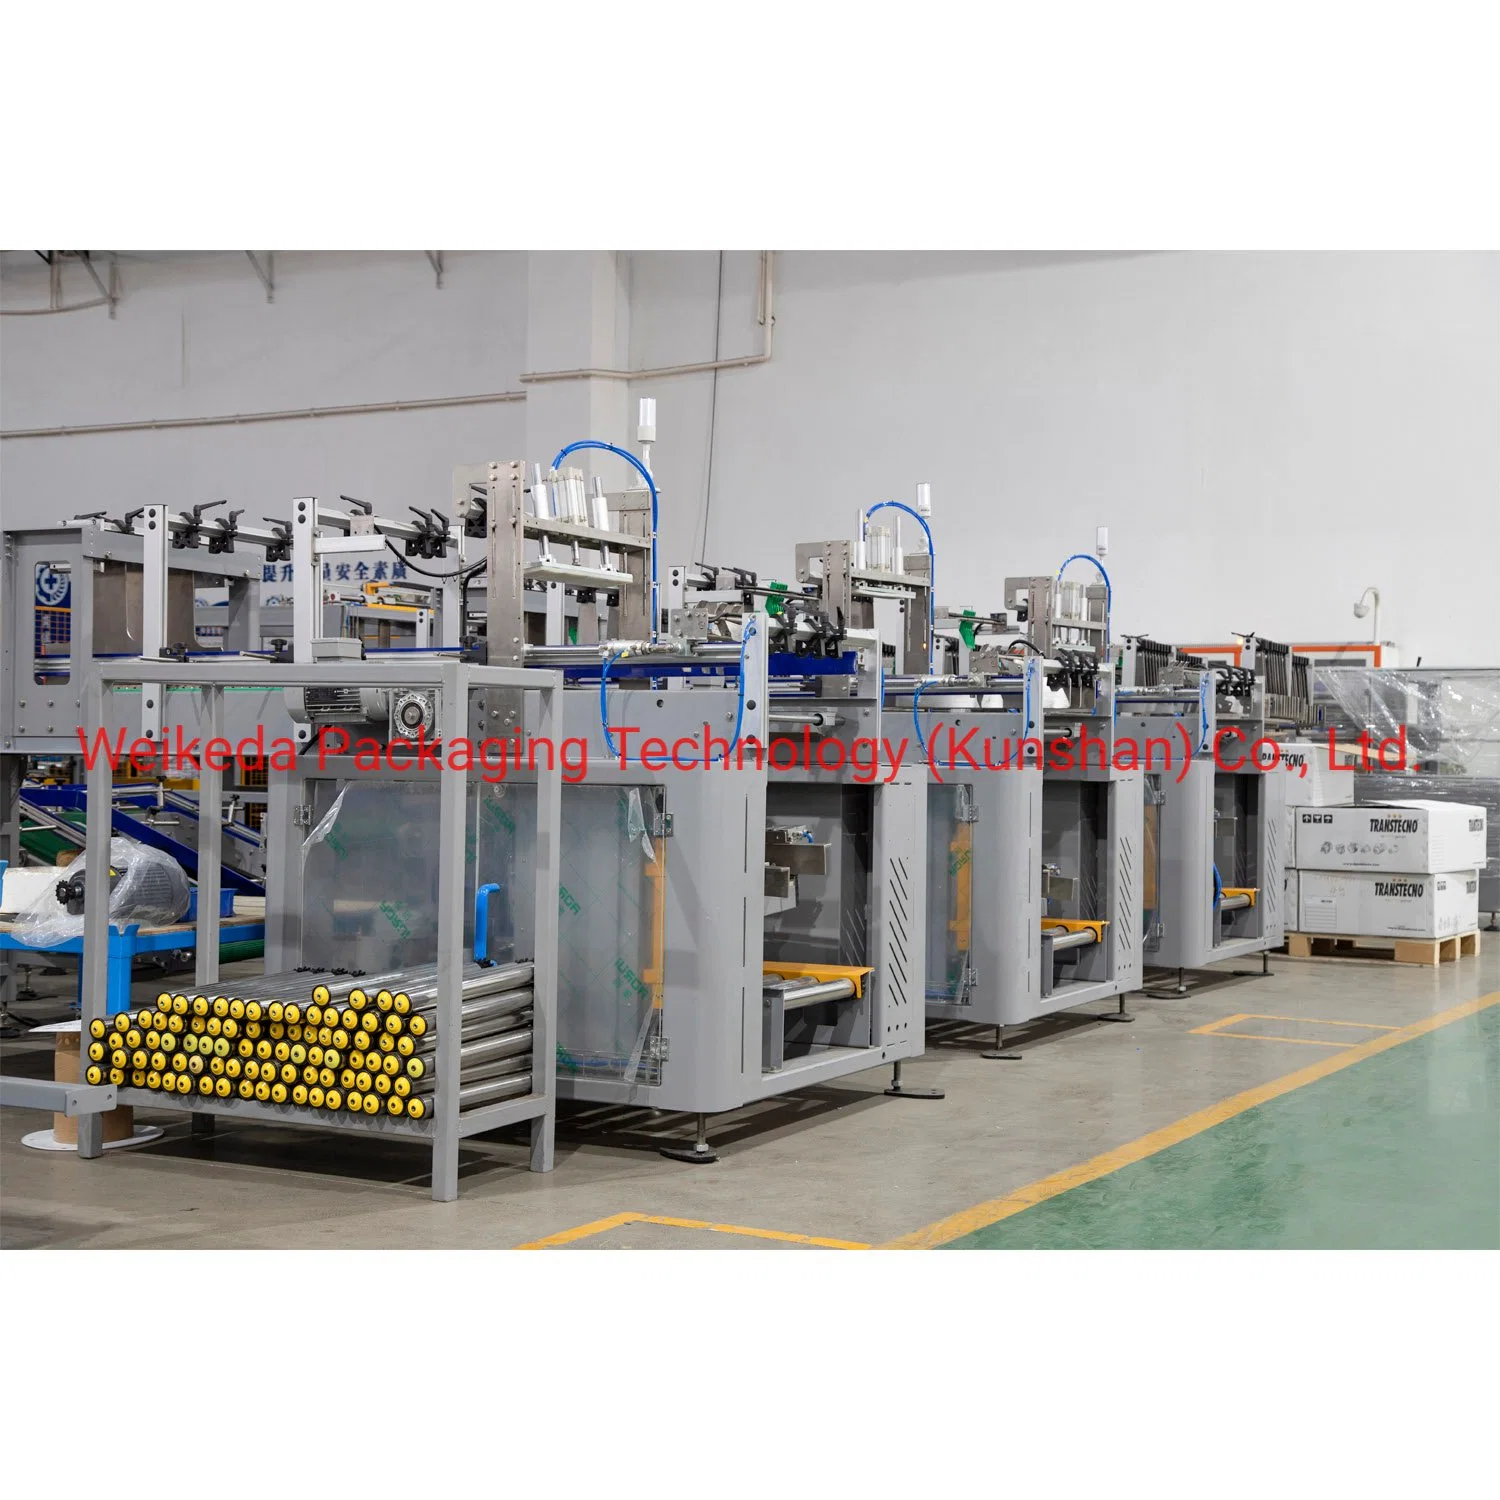 Top Load Packaging Machine and Automatic Case Packer Packing Packaging Machine